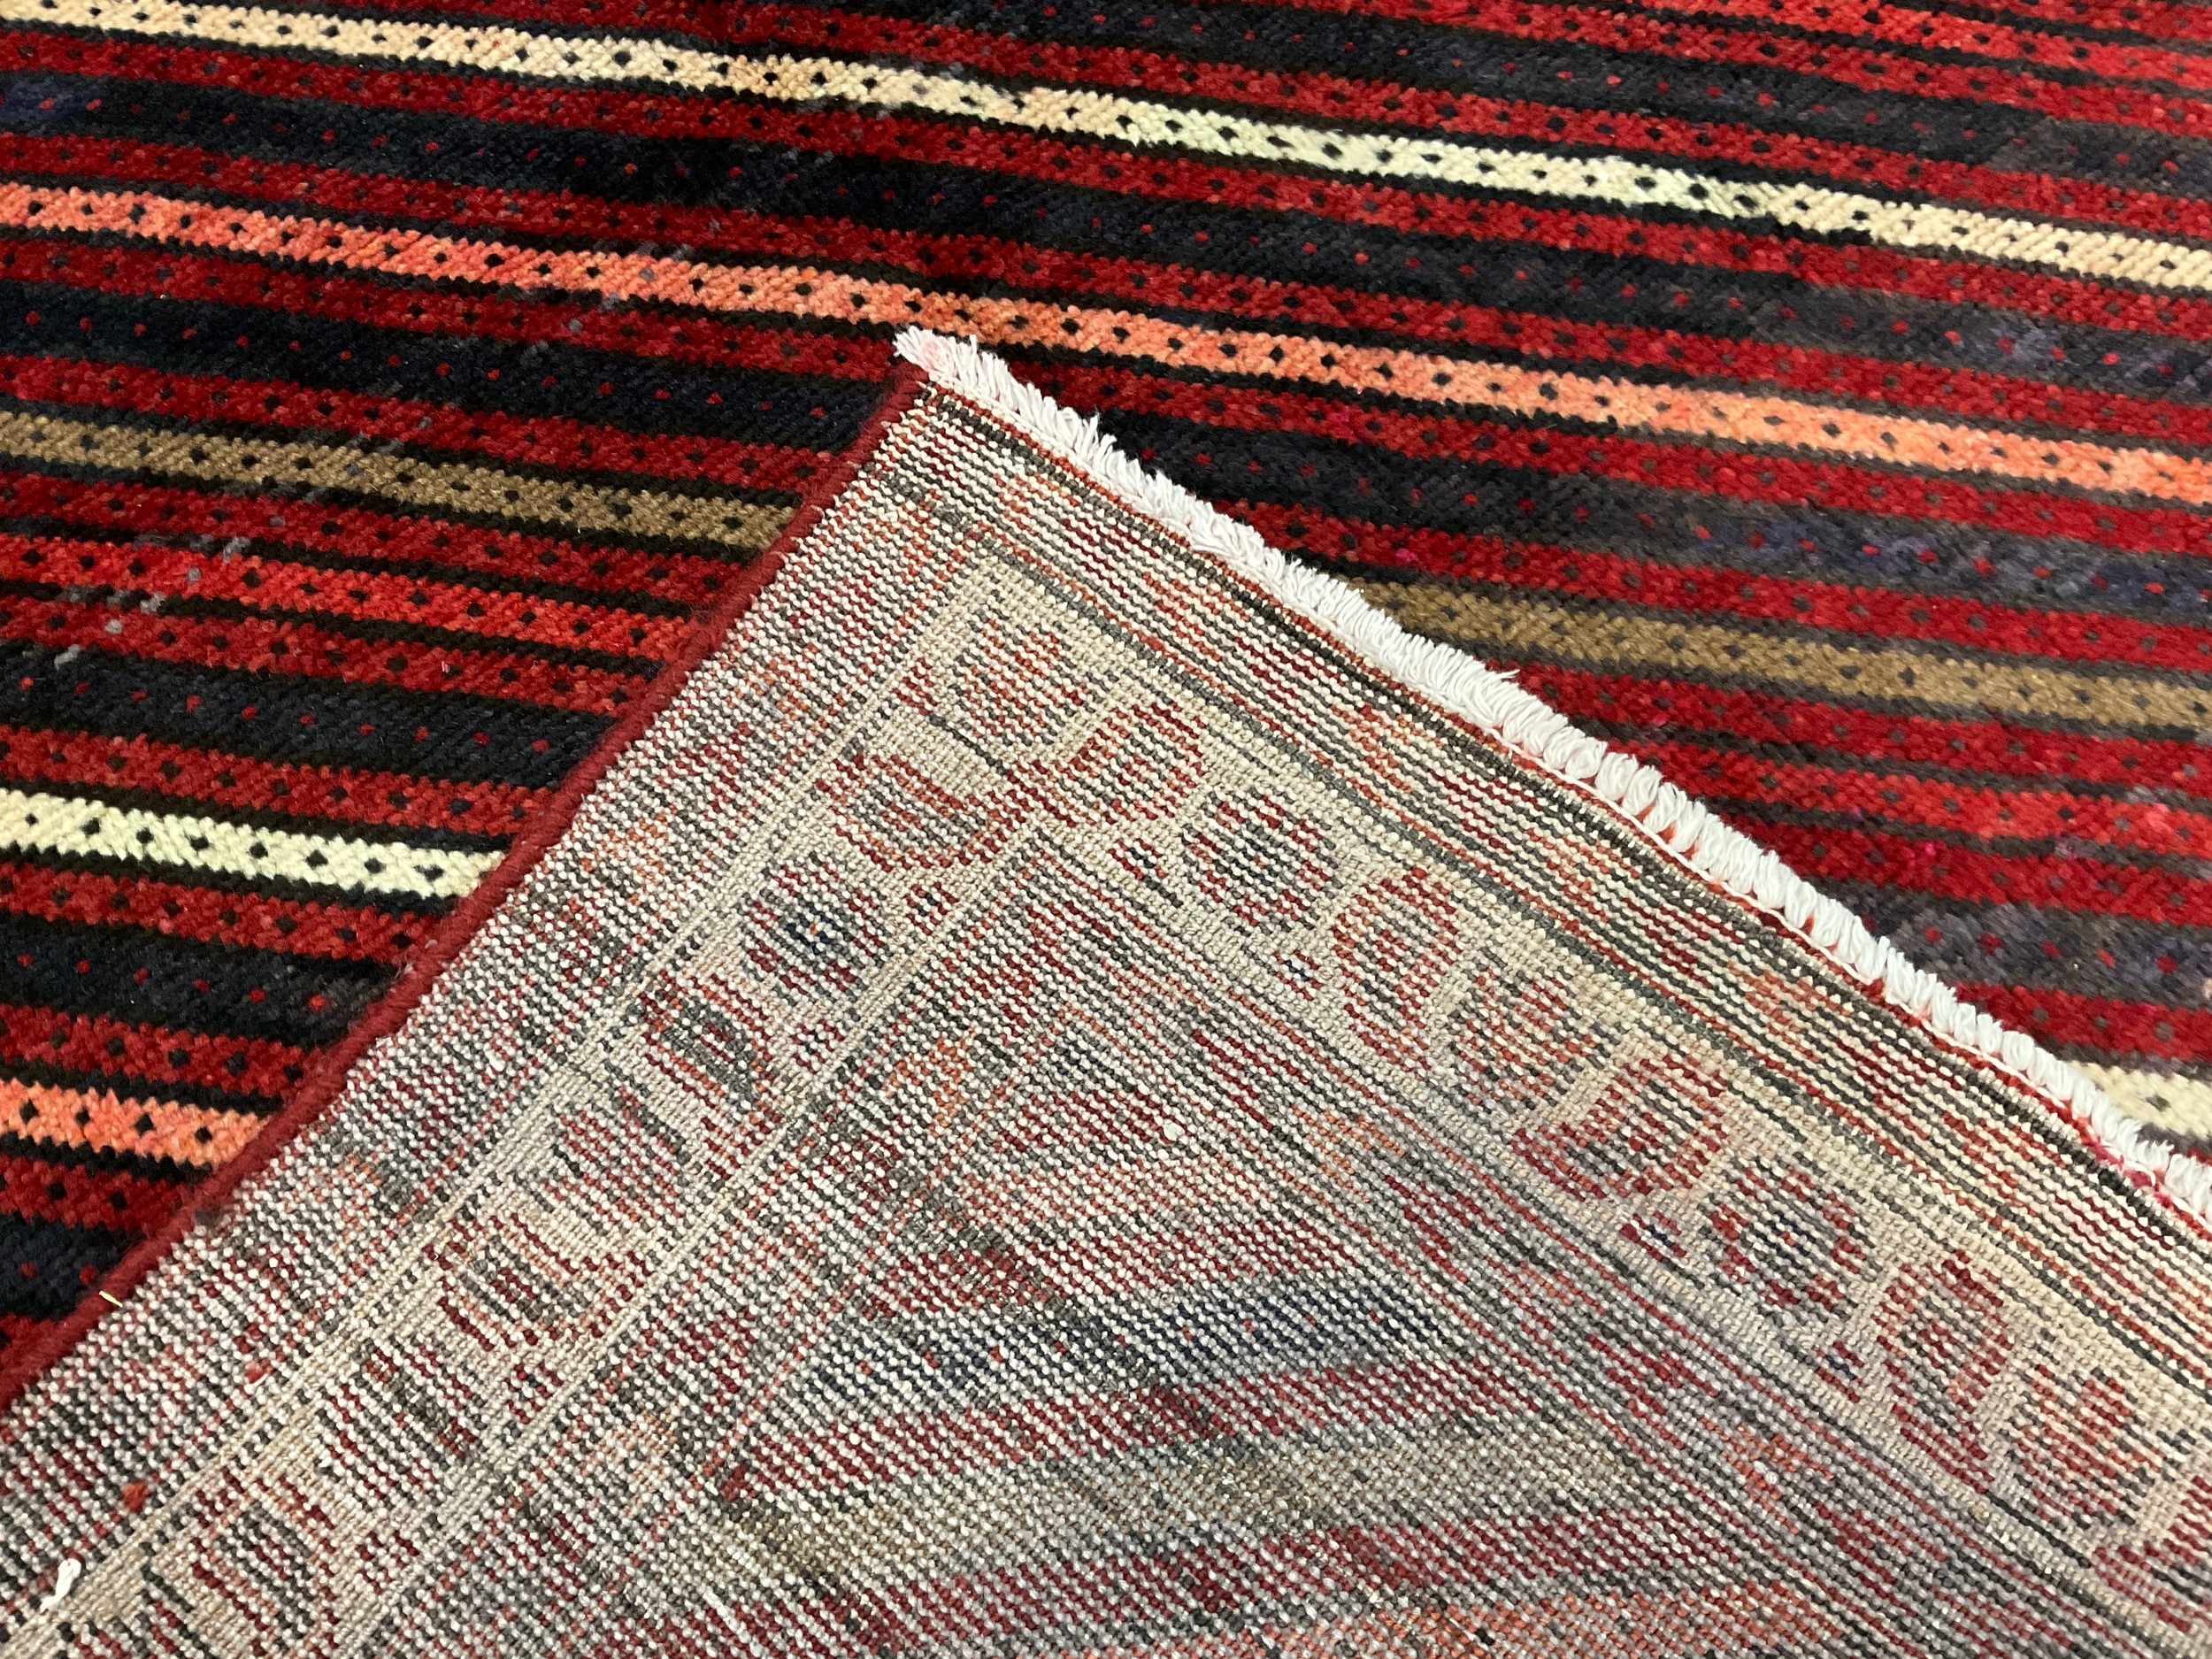 A South-west Persian Lori rug / carpet, hand-knotted, in tones of red, pink, deep indigo, and cream, - Image 2 of 2